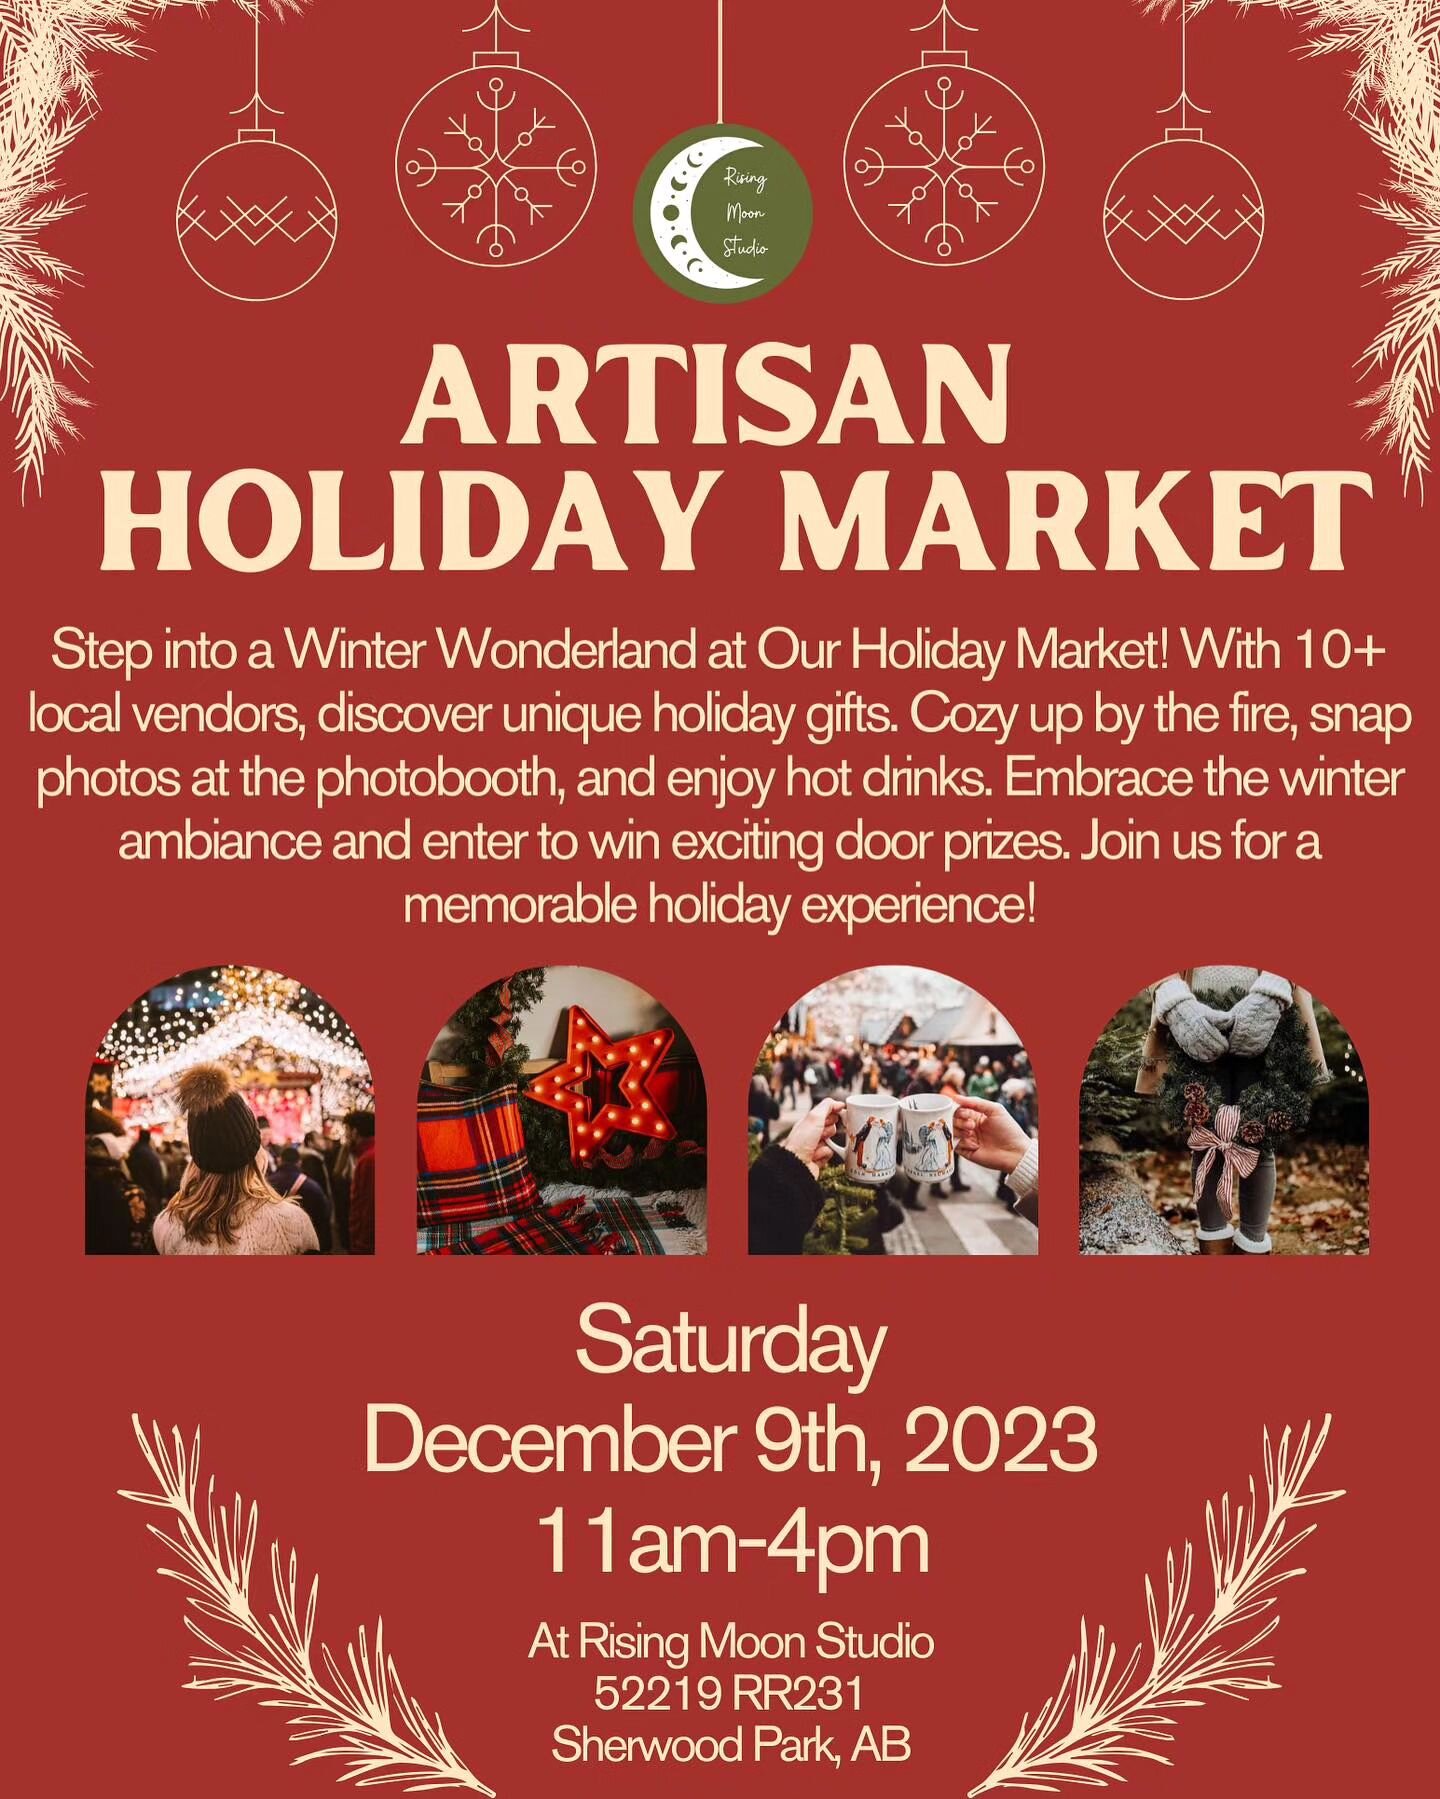 Come down this Saturday to the beautiful @rising.moon.studio for the holiday artisan market.

I'll be there offering herbal blends, including yoni steam blends my seasonal anxiety remedy tea and dream pillows!💫

#yegevents #thingstodoinedmonton #sho